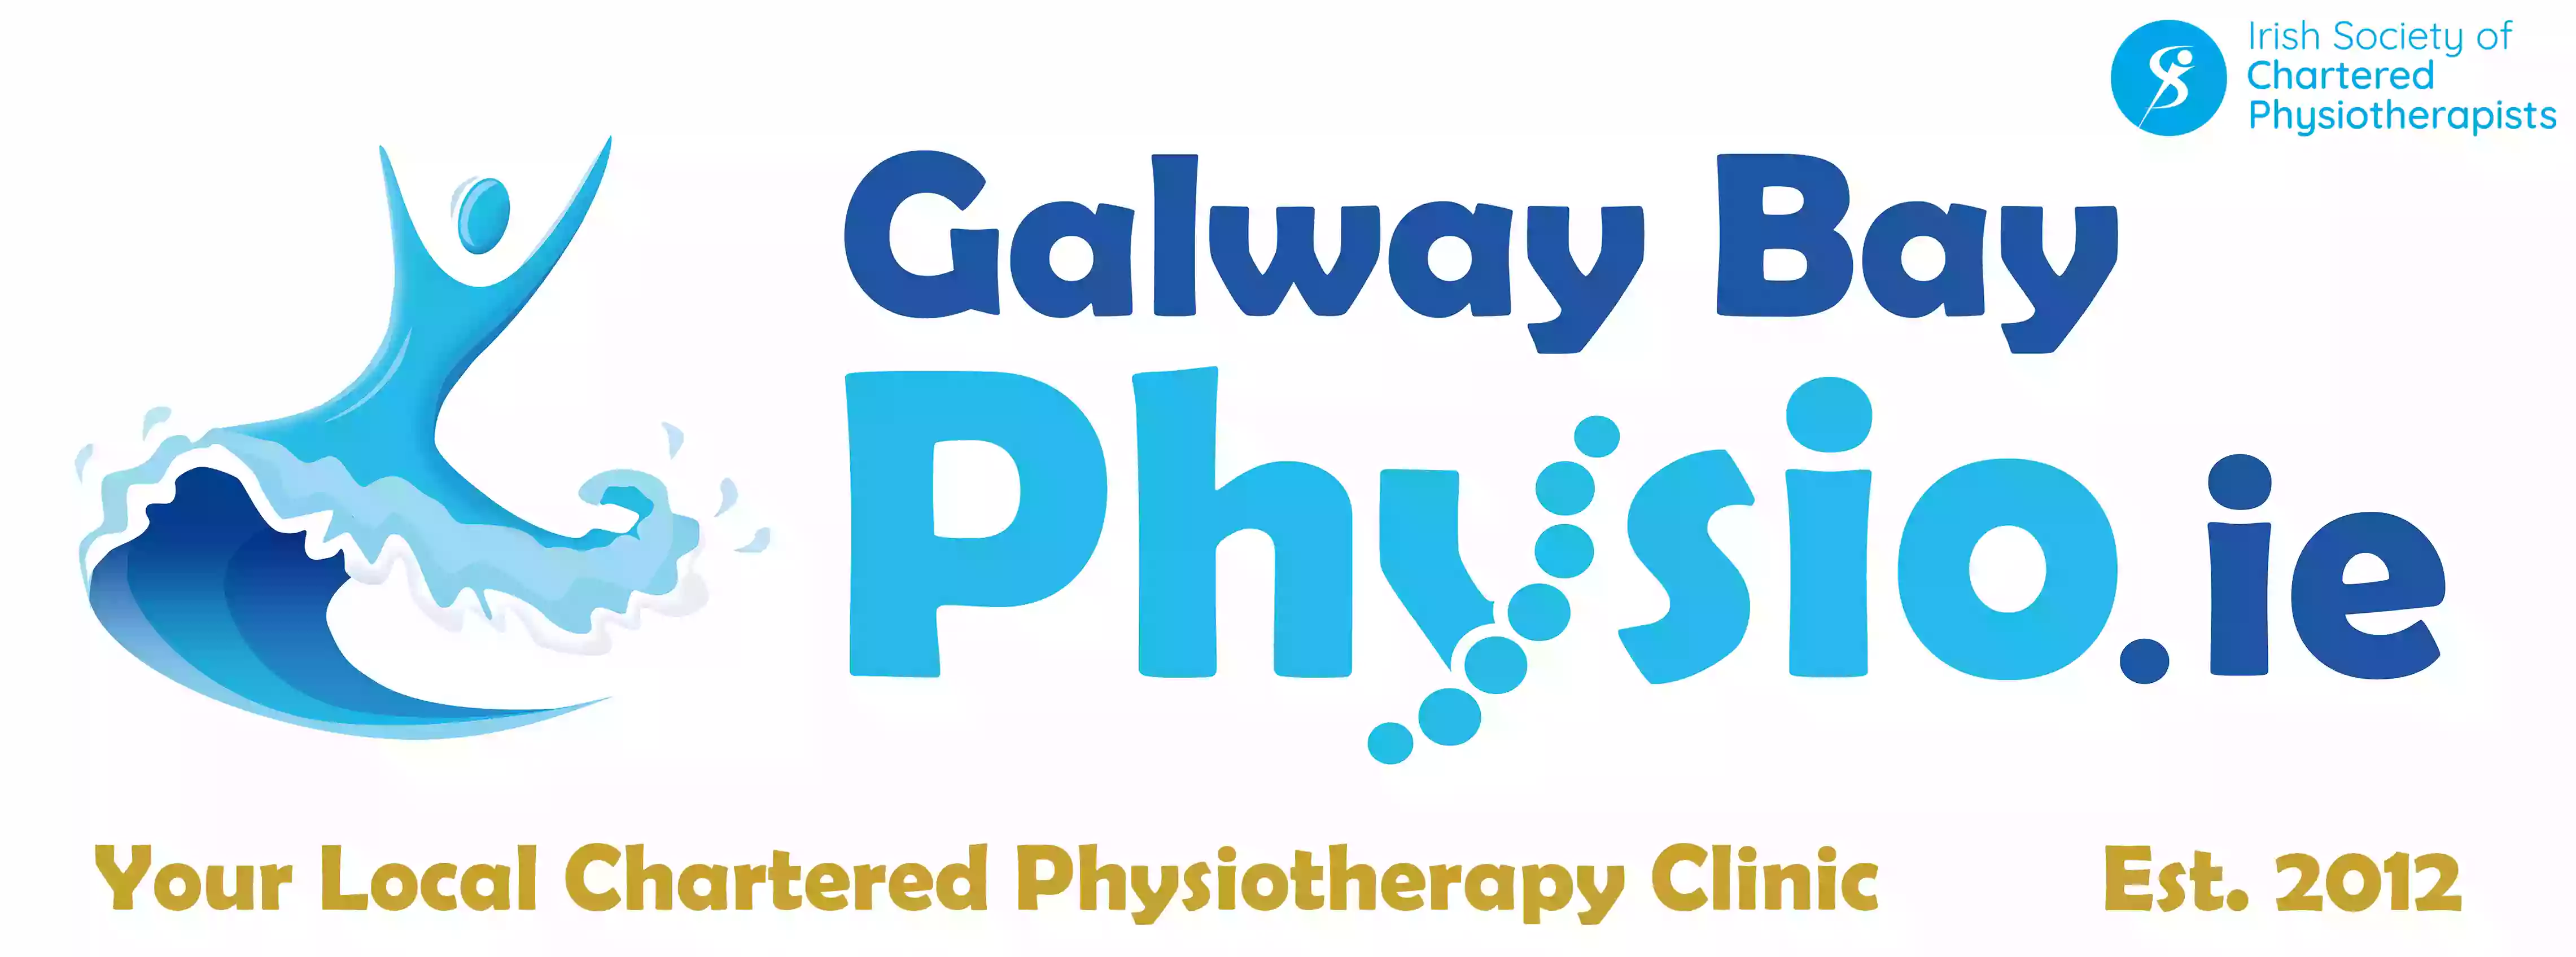 Galway Bay Physio Athenry(Online and face to face Consultations)